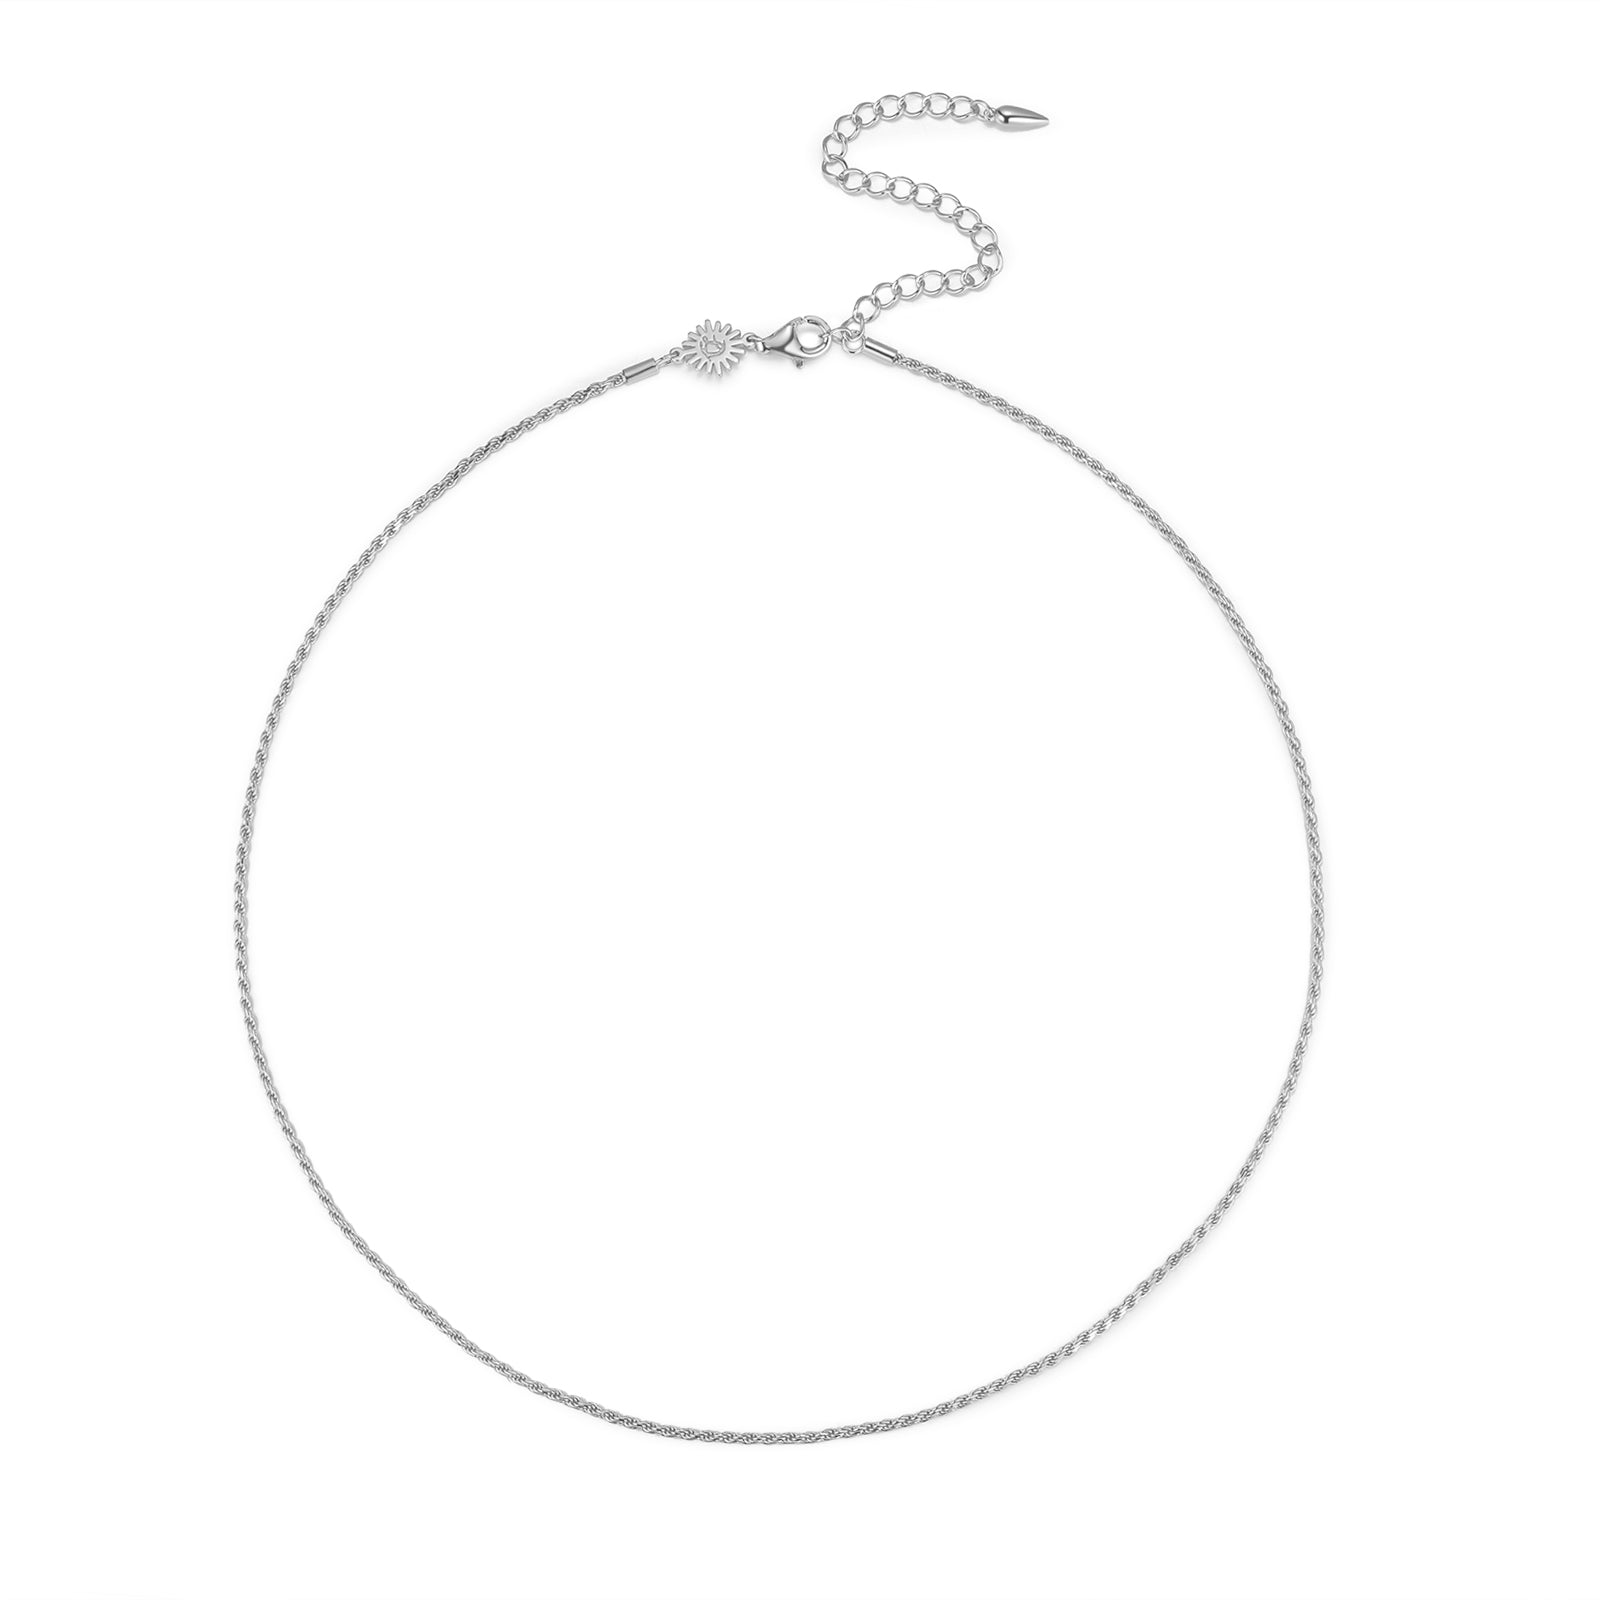 Silver Rope Necklace Chain | LOVE BY THE MOON